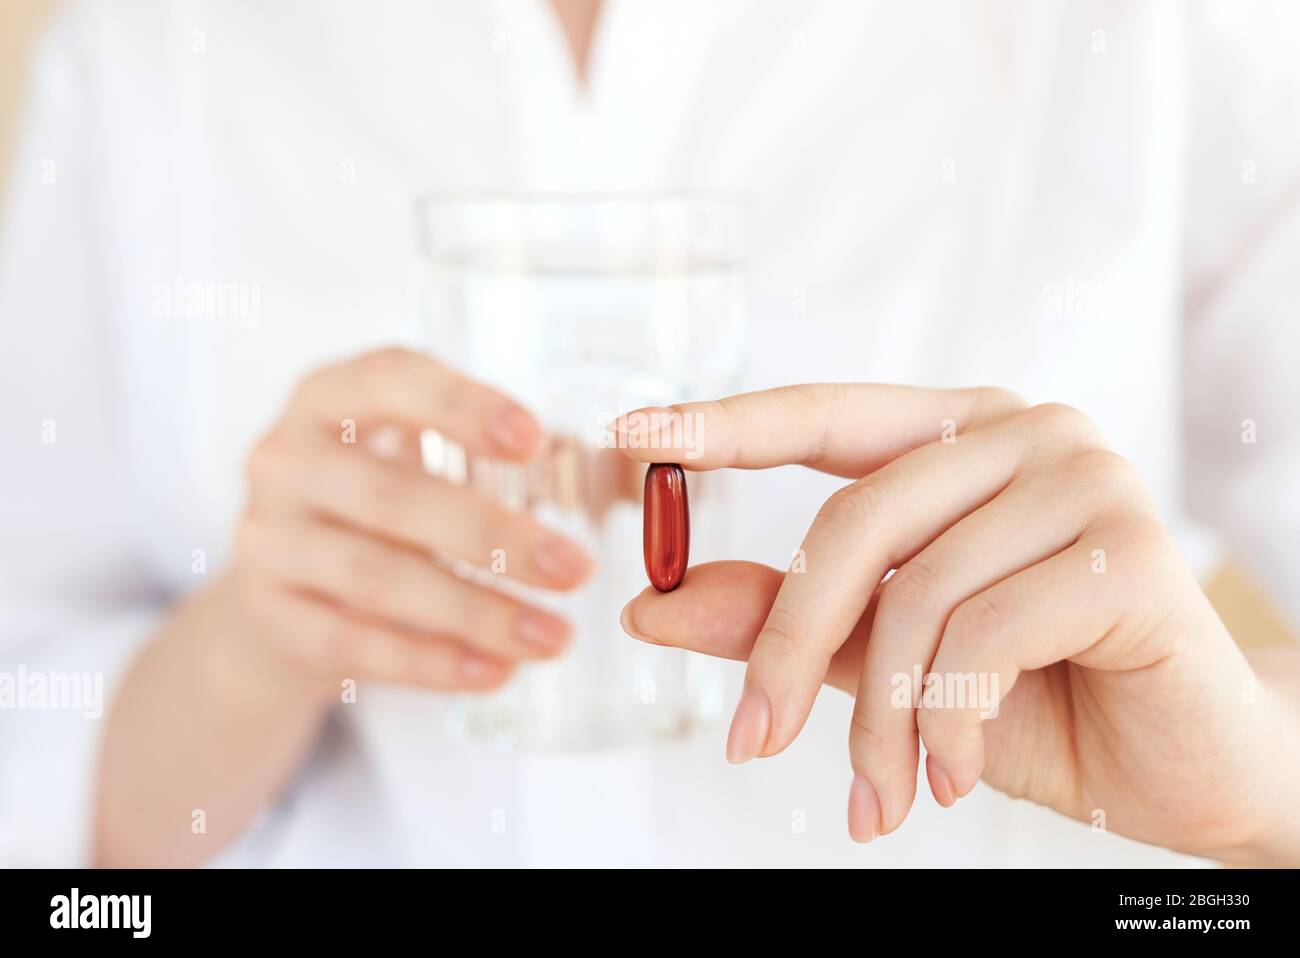 Healthcare and medical concept. Close-up view of woman holding pill in one hand and glass of water in the another hand. Focus on the pill. Coronavirus Stock Photo